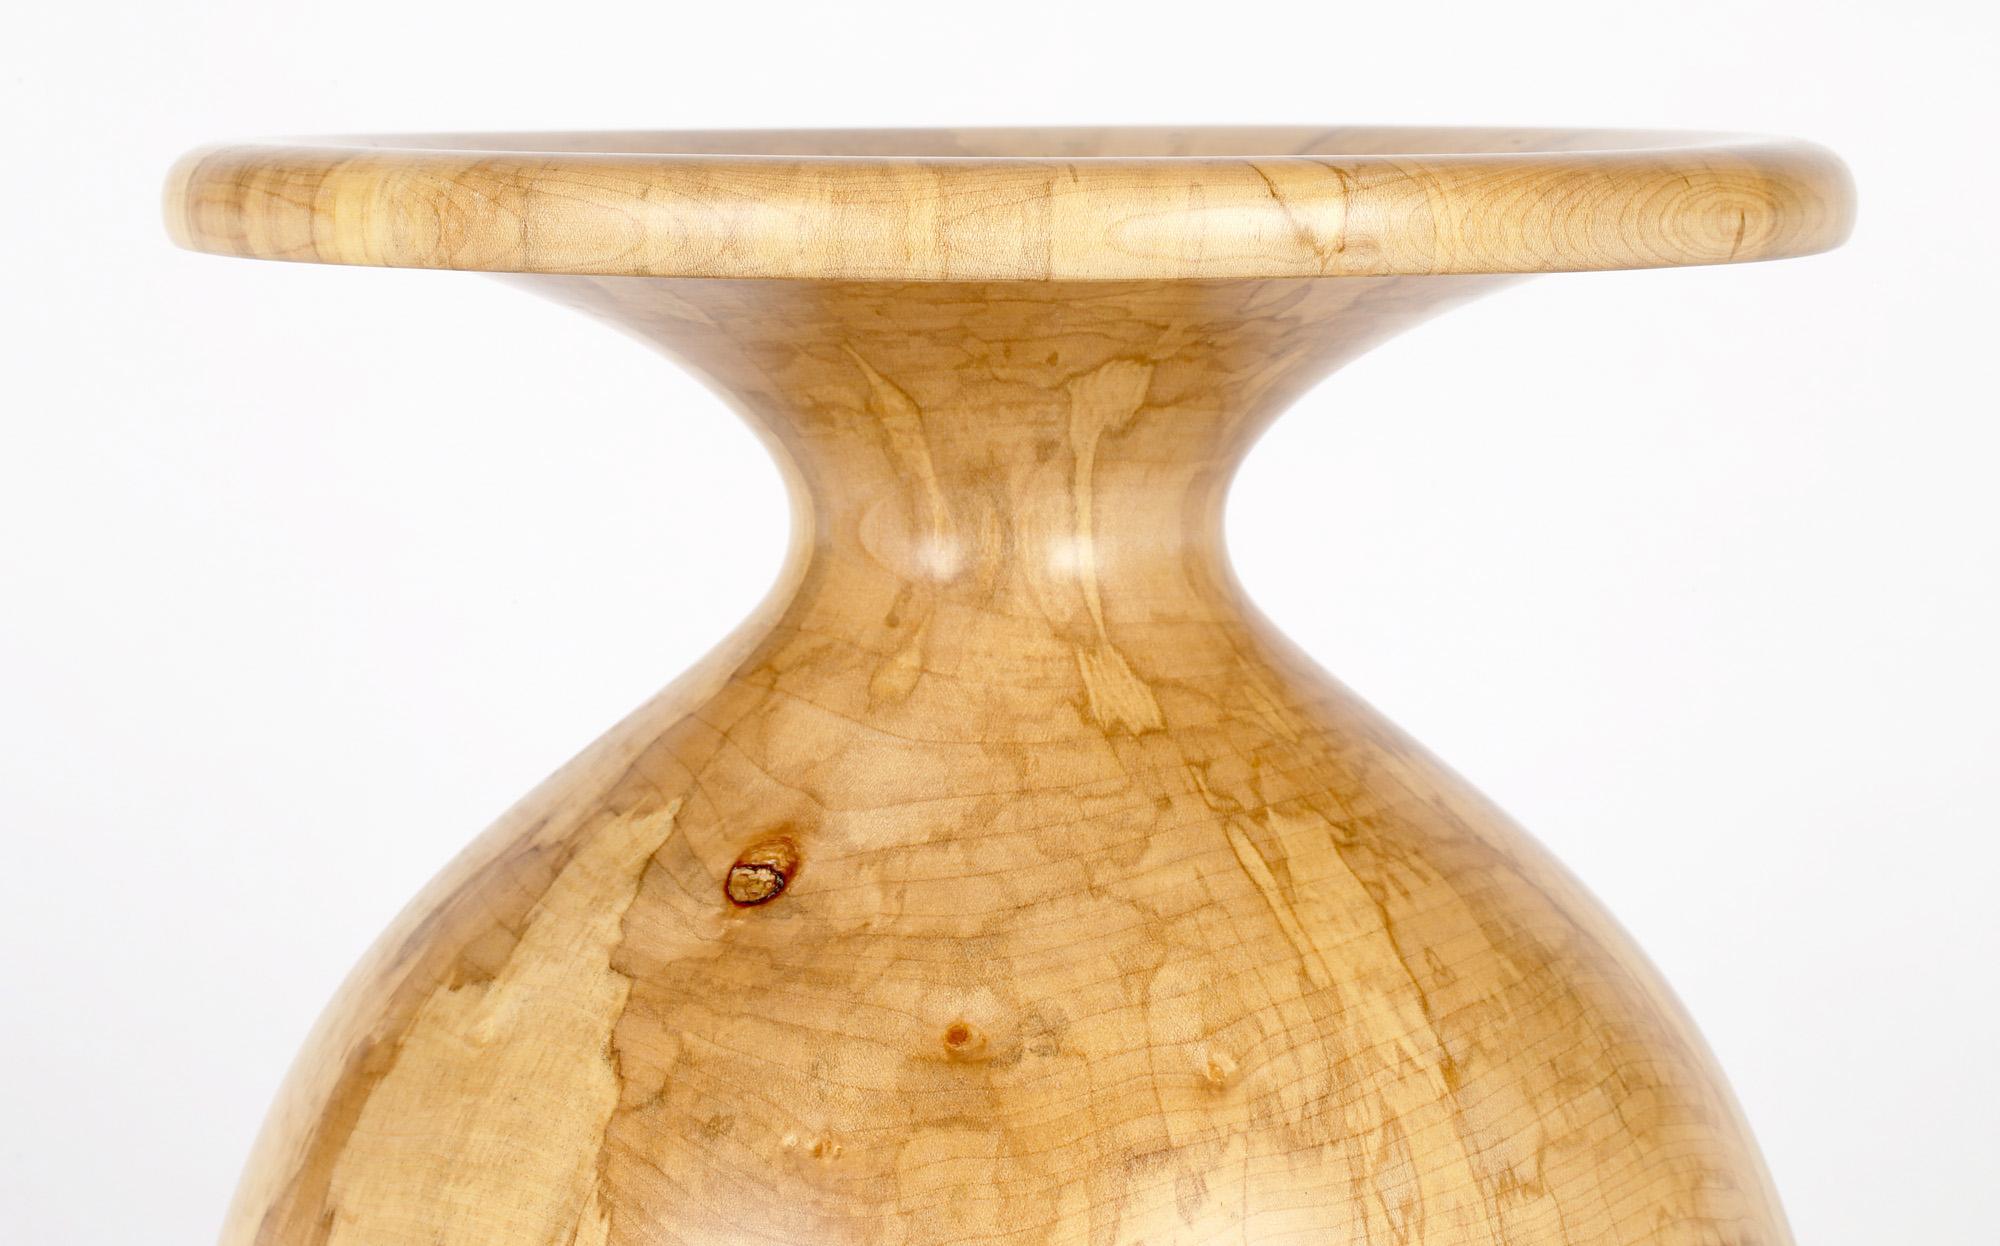 Richard Chapman English Large Hand Turned Spalted Sycamore Vase For Sale 9